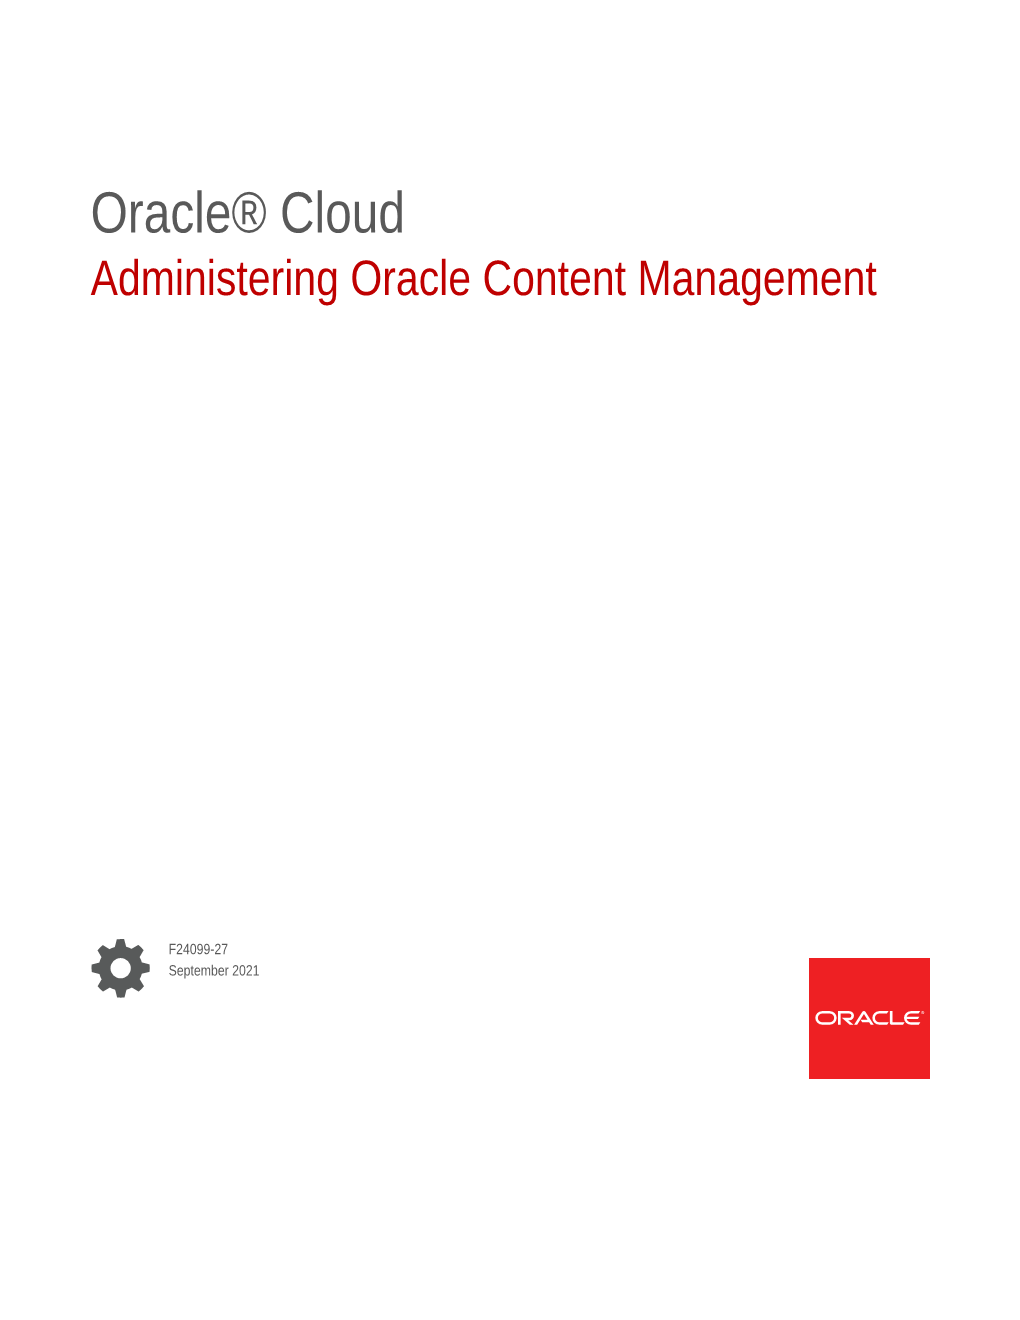 Administering Oracle Content Management